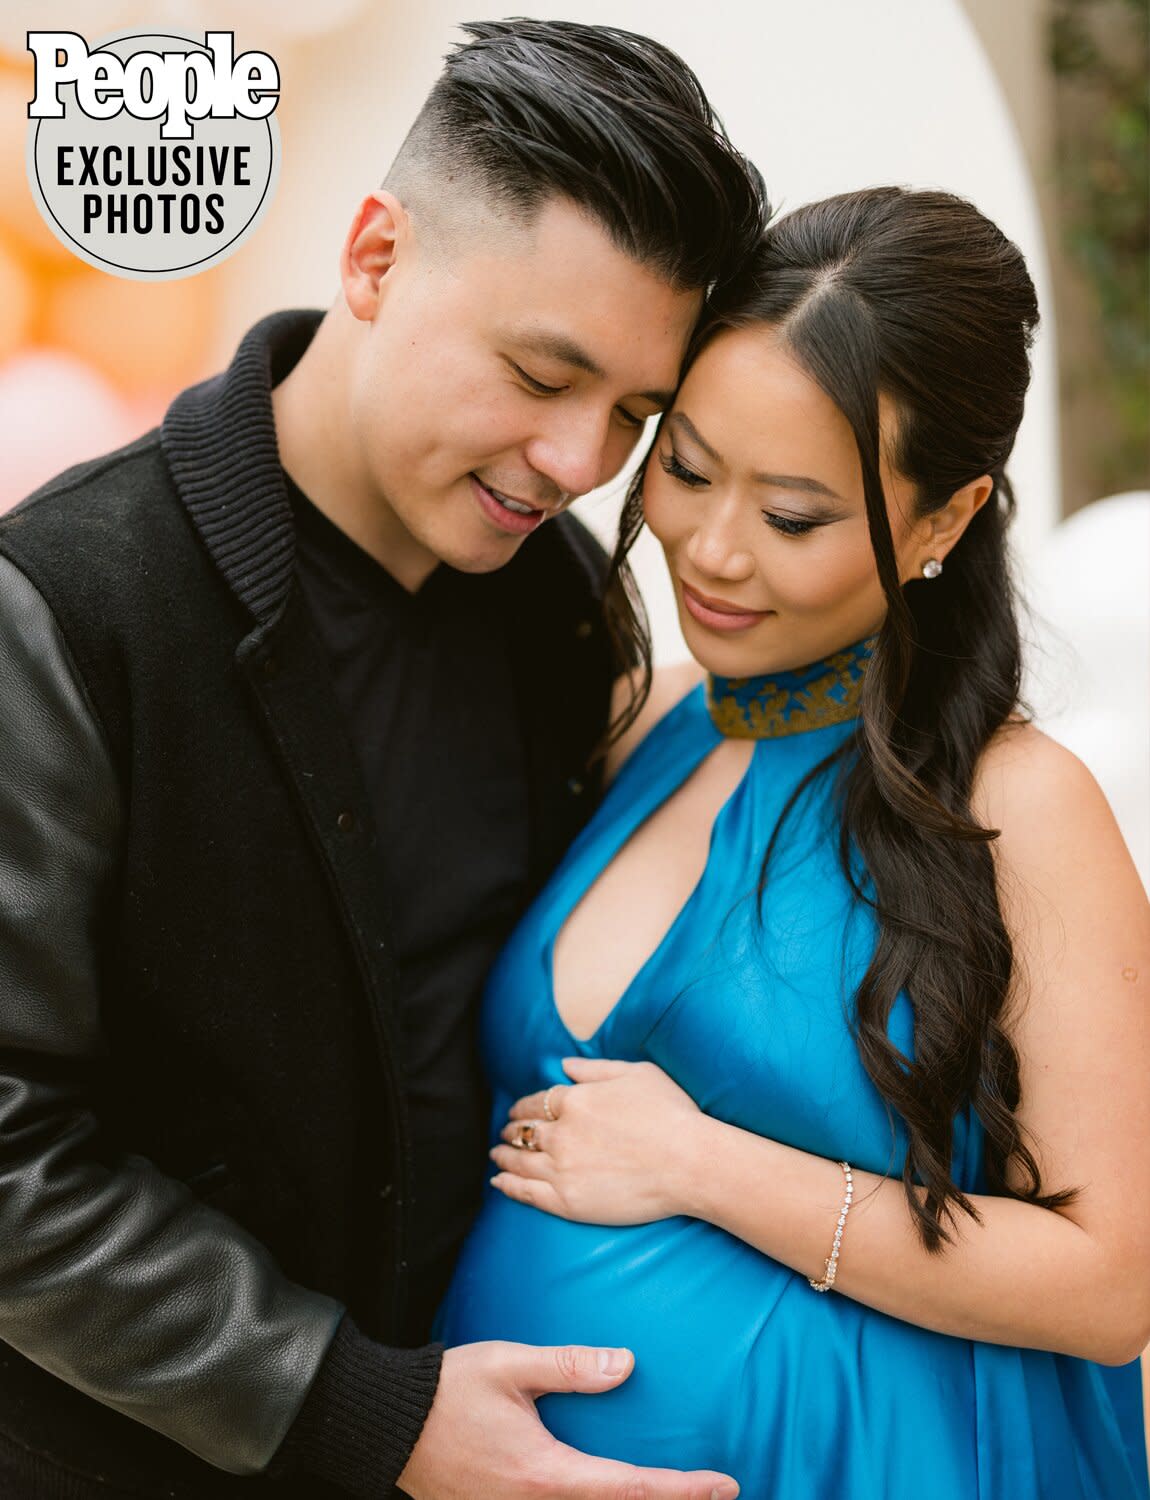 Bling Empire Star Kelly Mi Li Celebrates Her Baby Girl with Loved Ones in Intimate Baby Shower